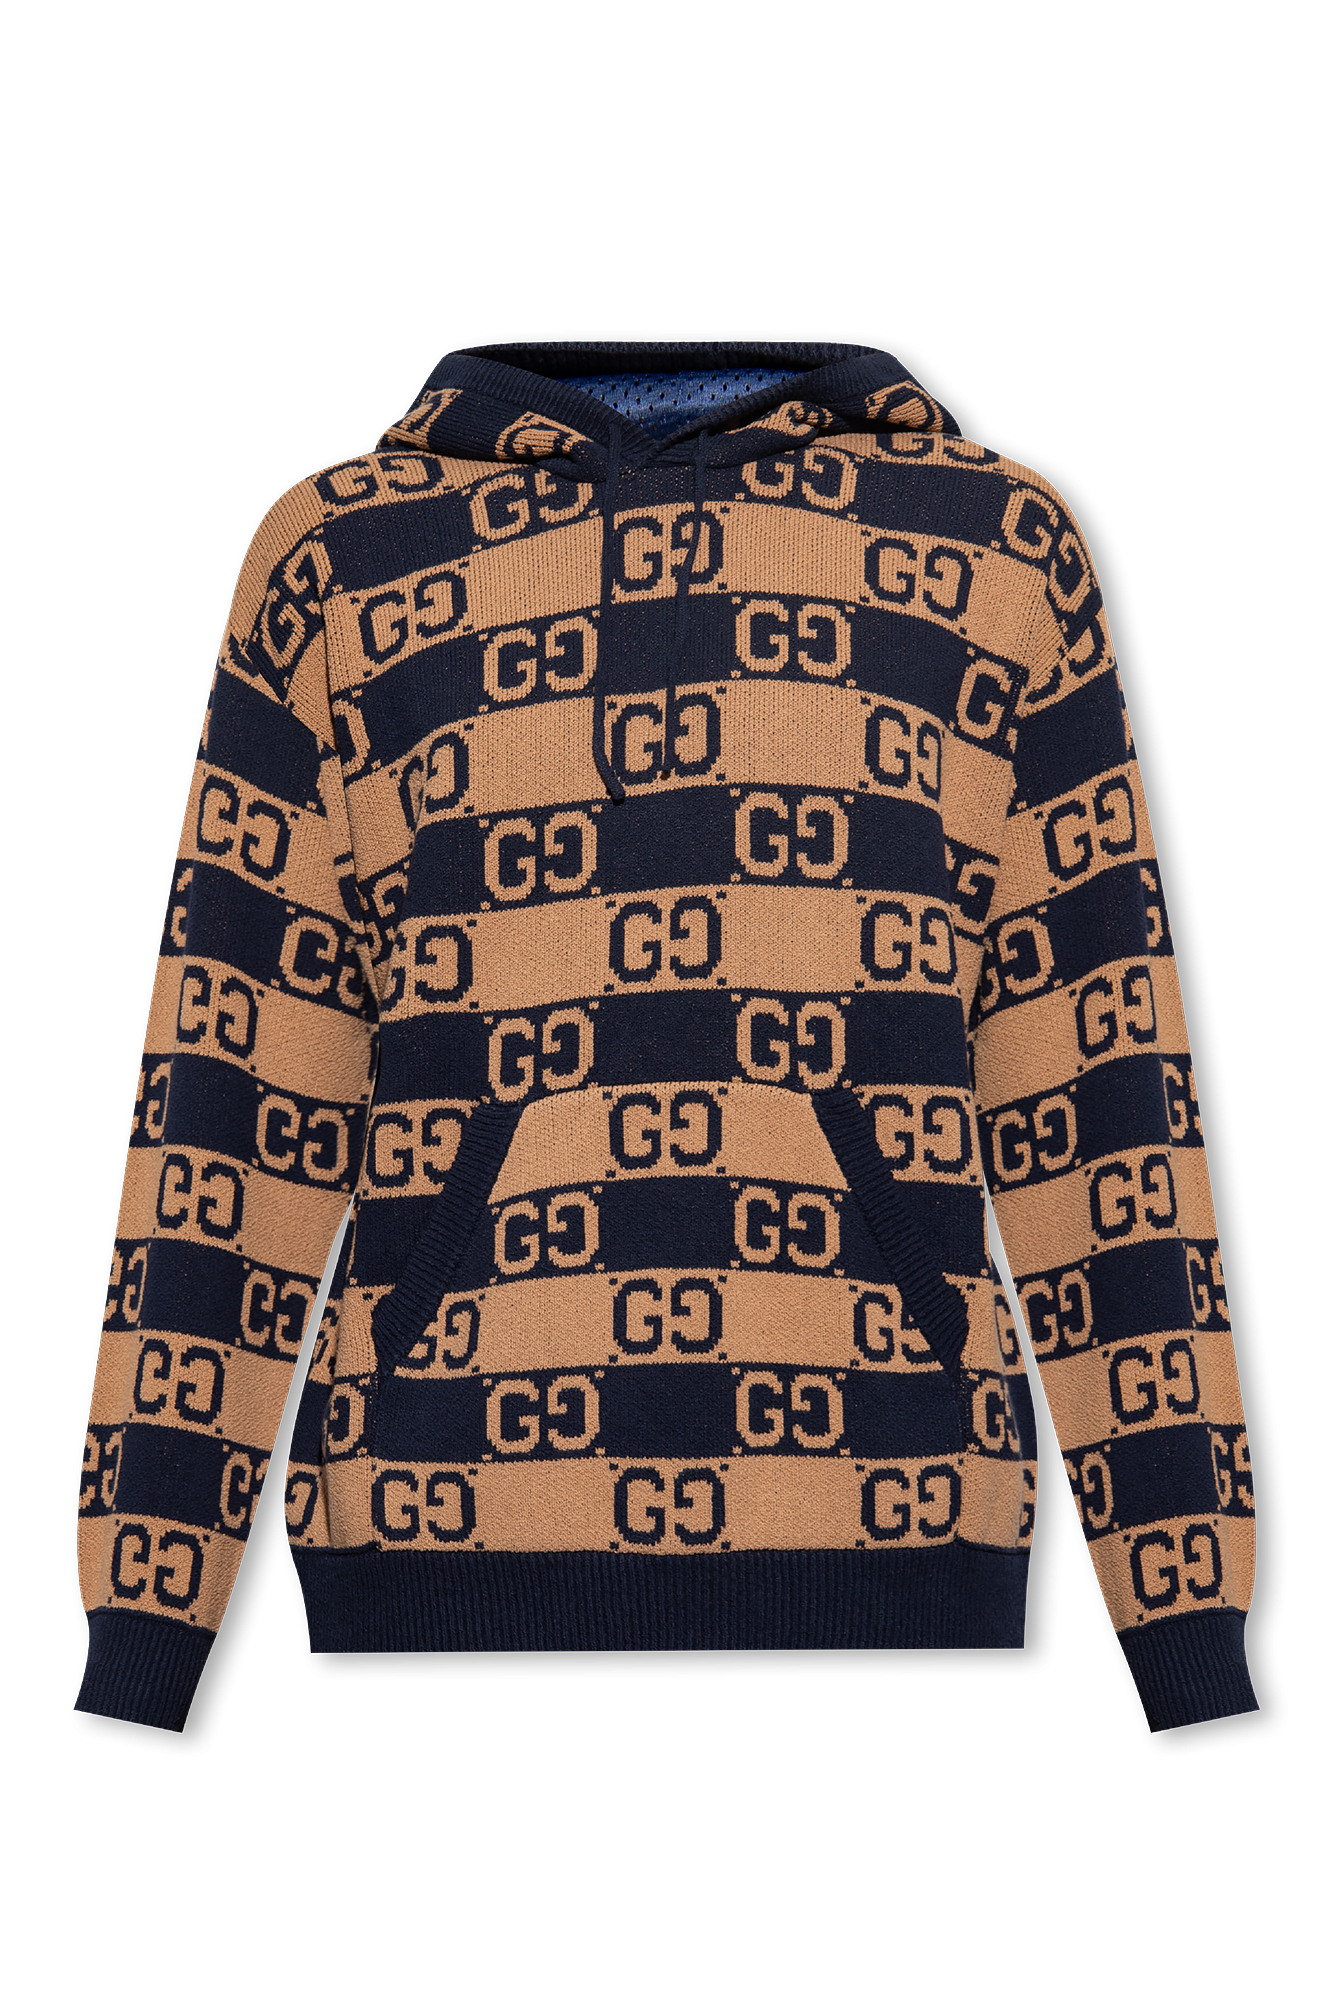 Gucci Patterned hoodie